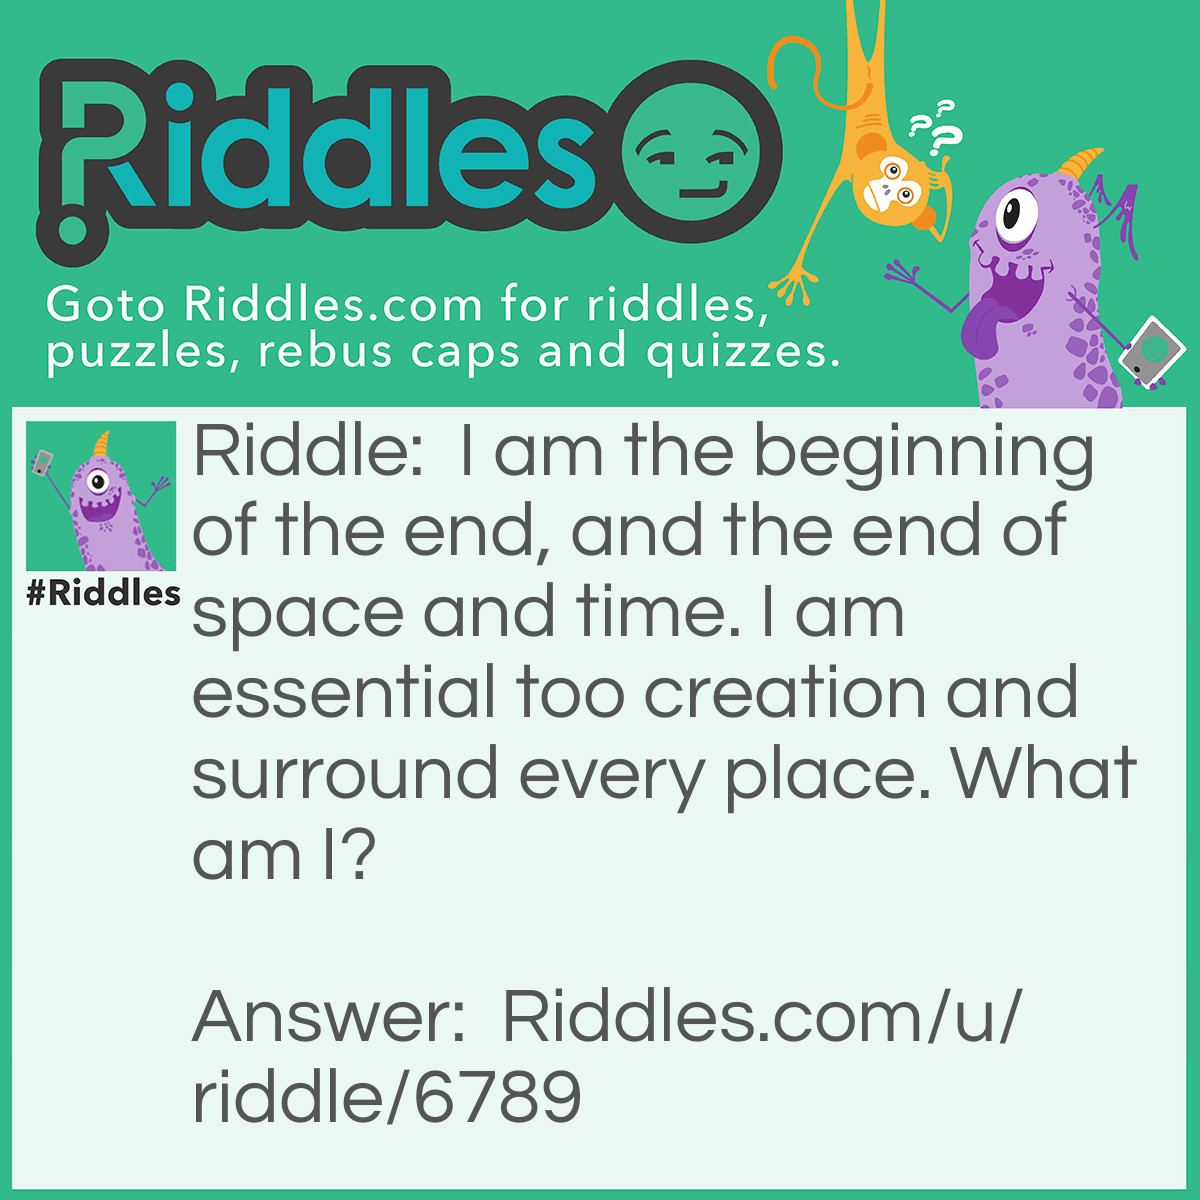 Riddle: I am the beginning of the end, and the end of space and time. I am essential too creation and surround every place. What am I? Answer: The letter E.